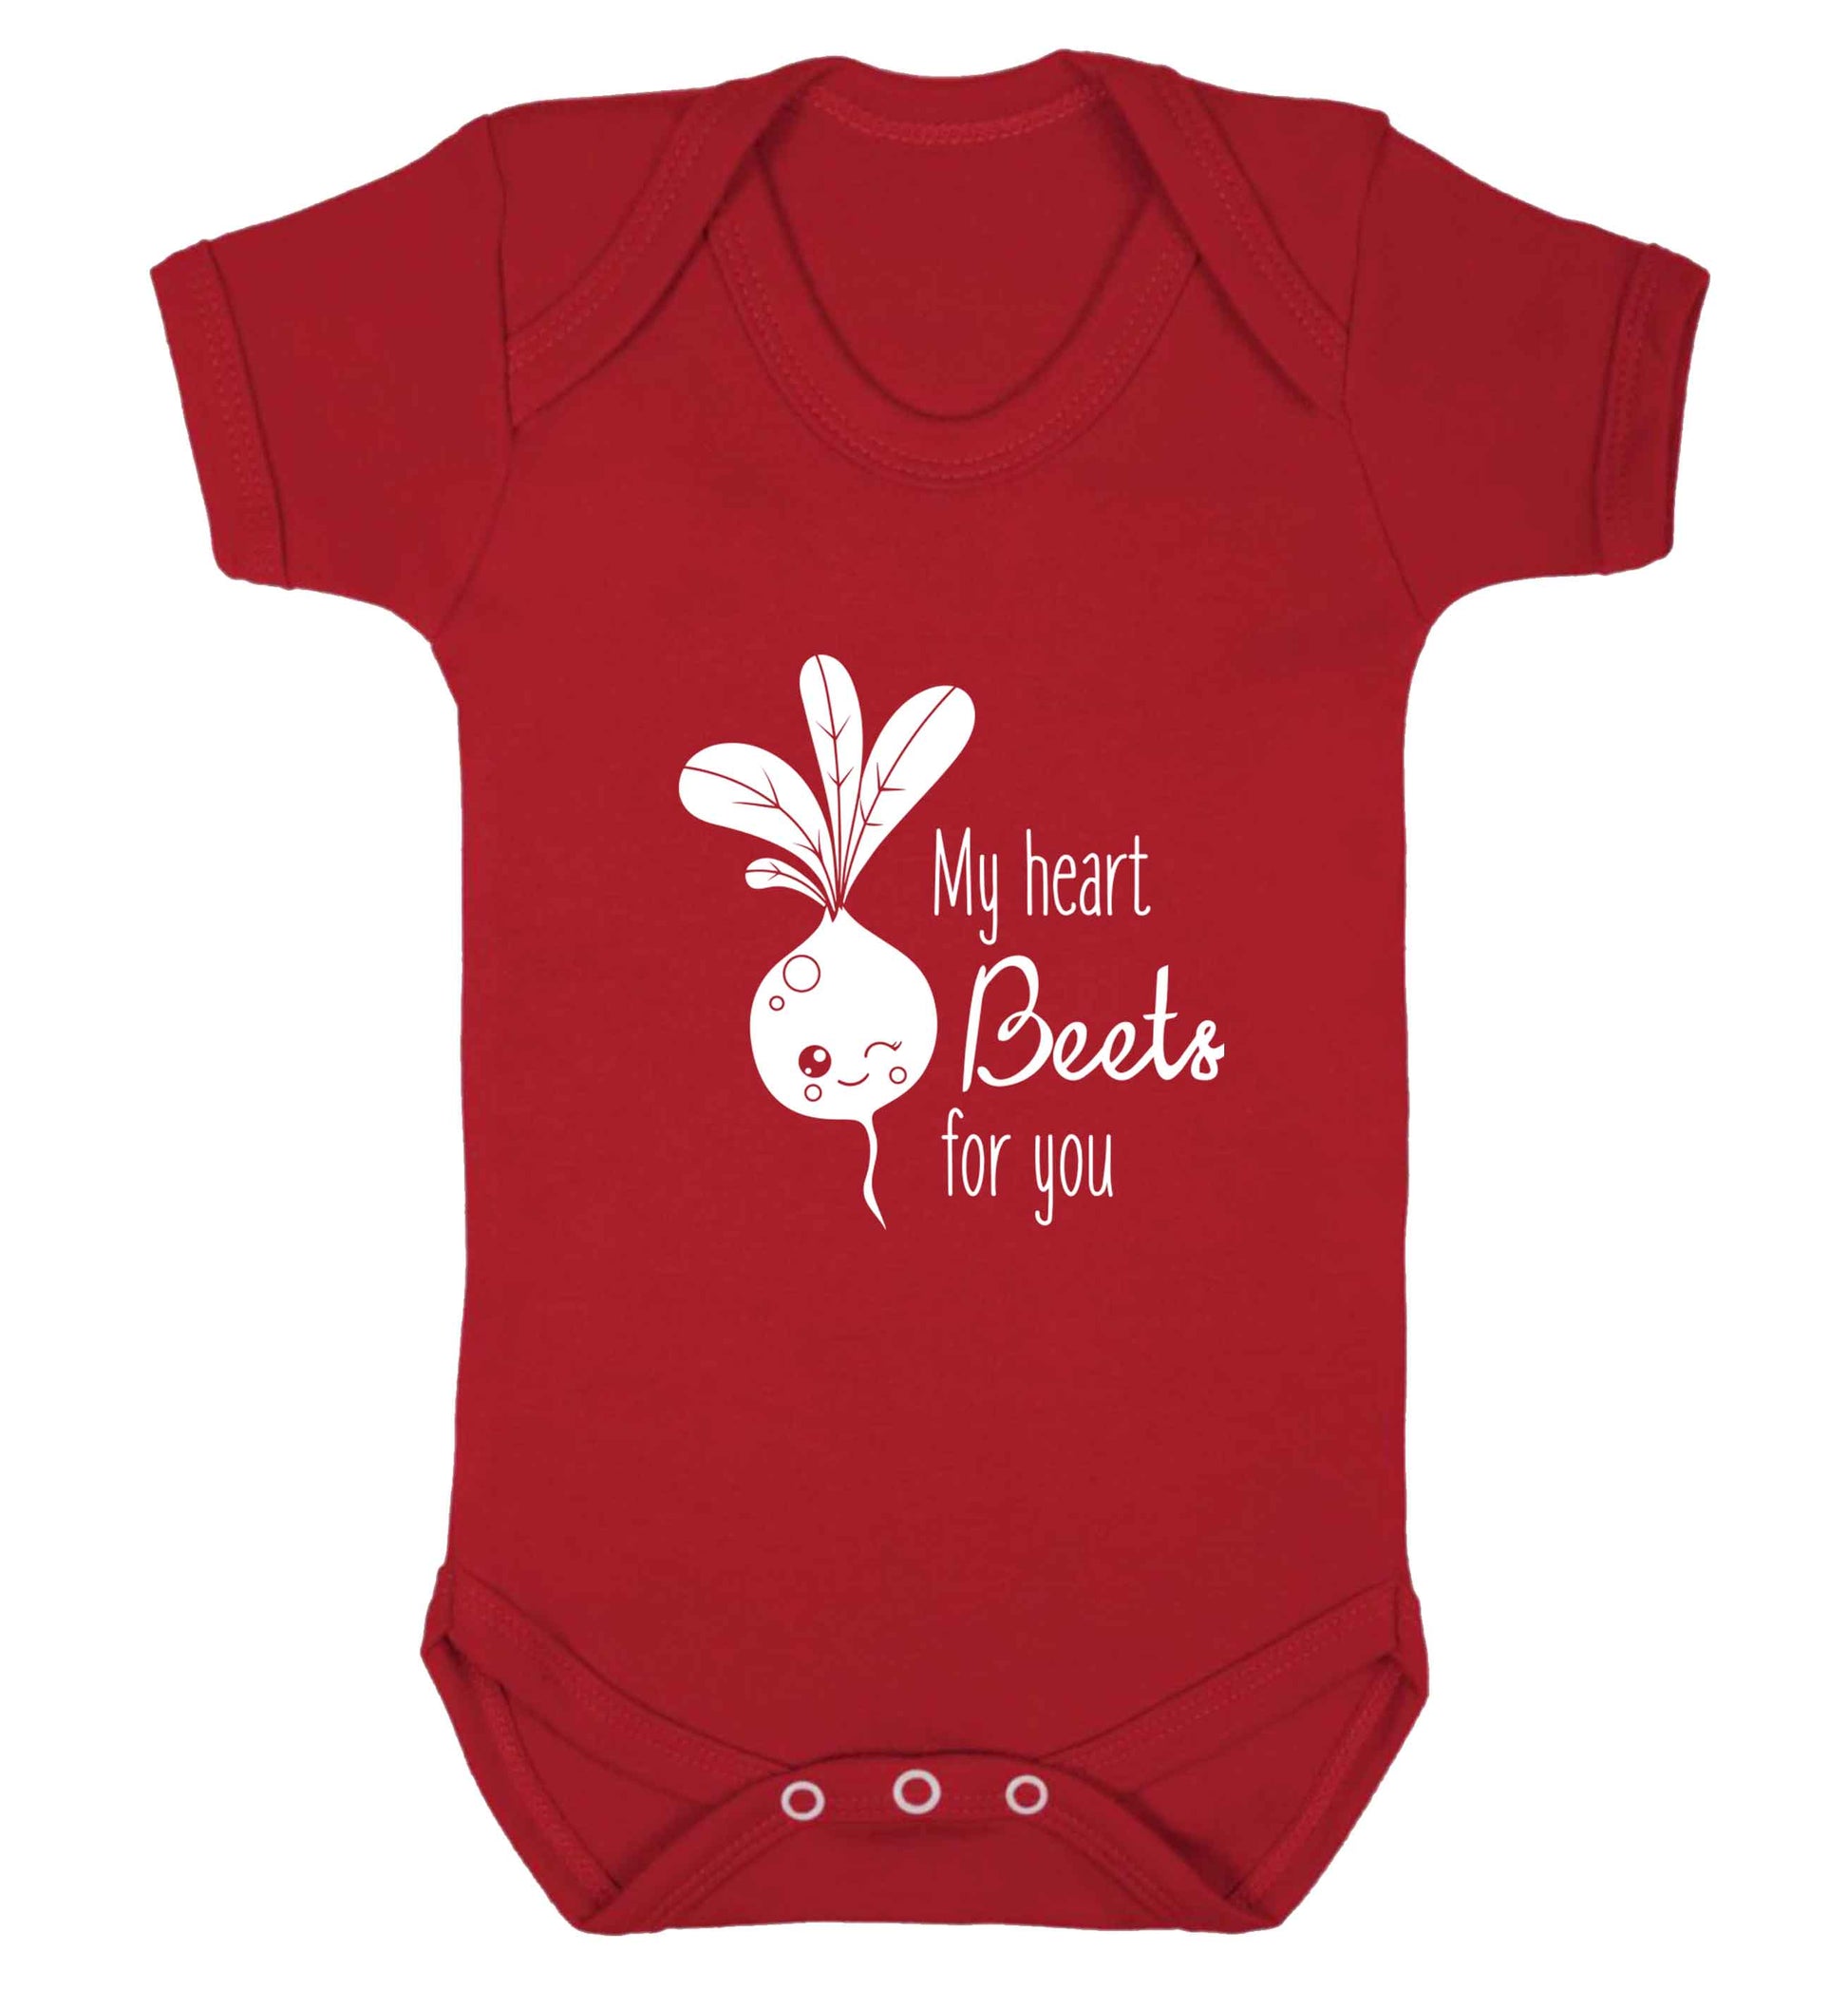 My heart beets for you baby vest red 18-24 months